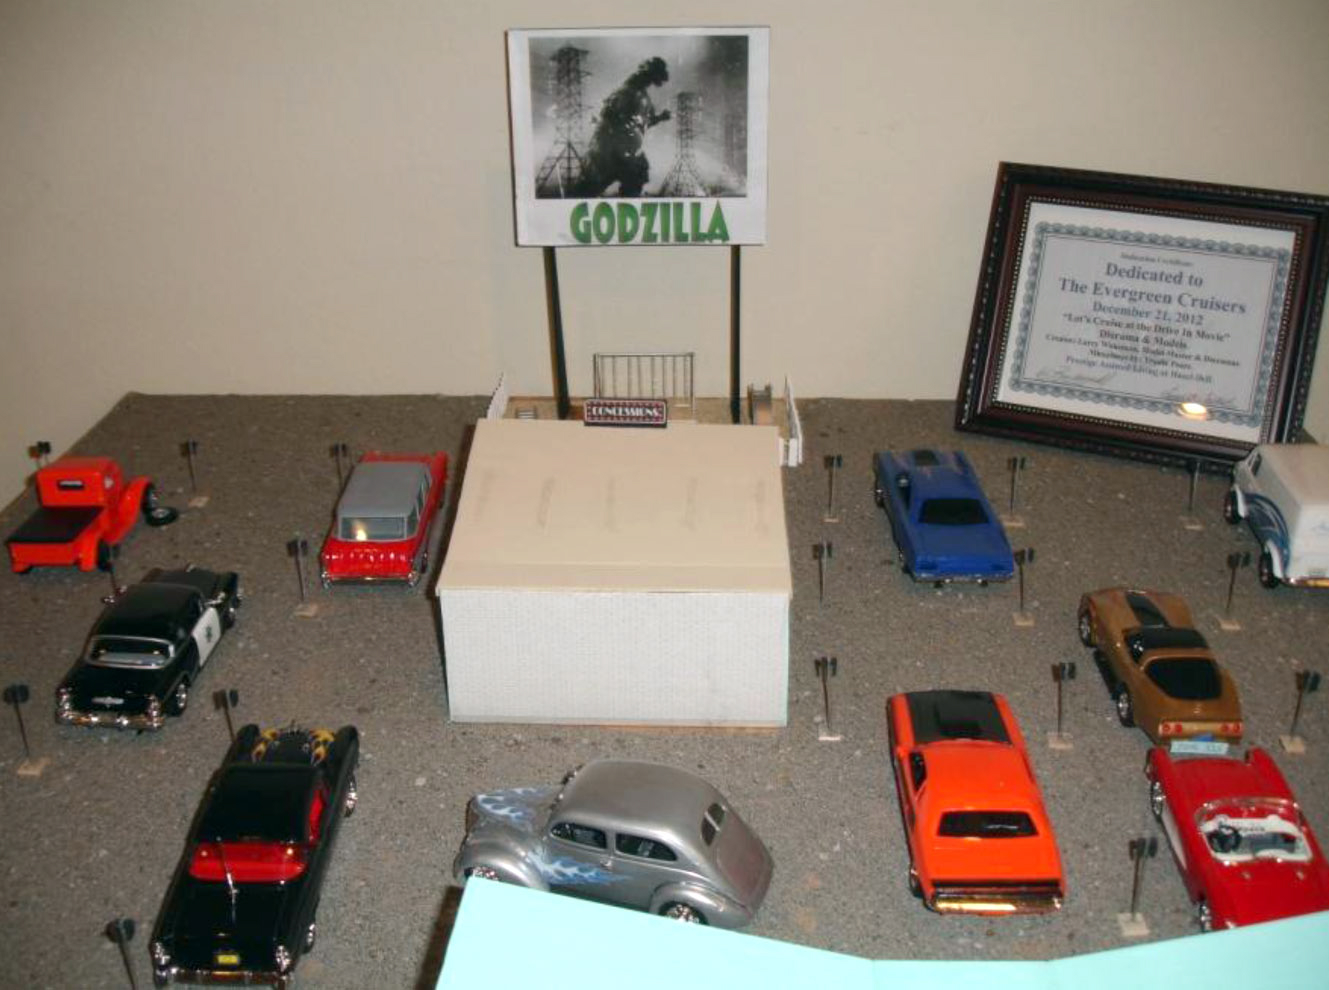 Northeast Hazel Dell: Larry Wakeman created this drive-in theater diorama and dedicated it to a local car club.